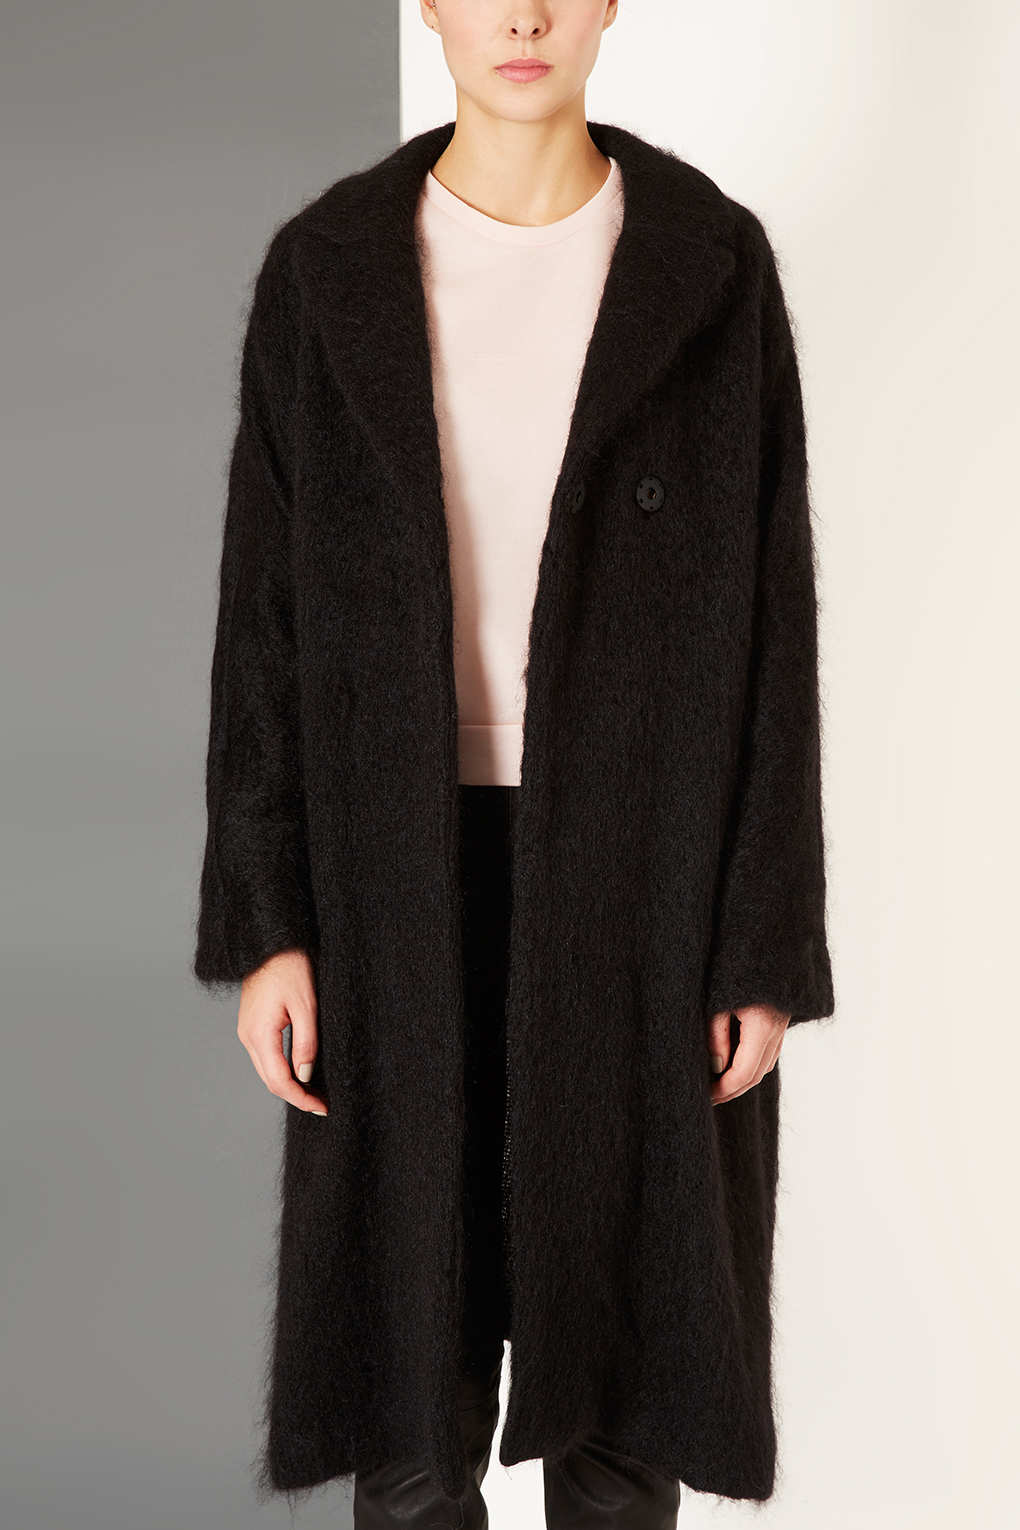 Lyst - Topshop Mohair Oversize Coat By Boutique in Black